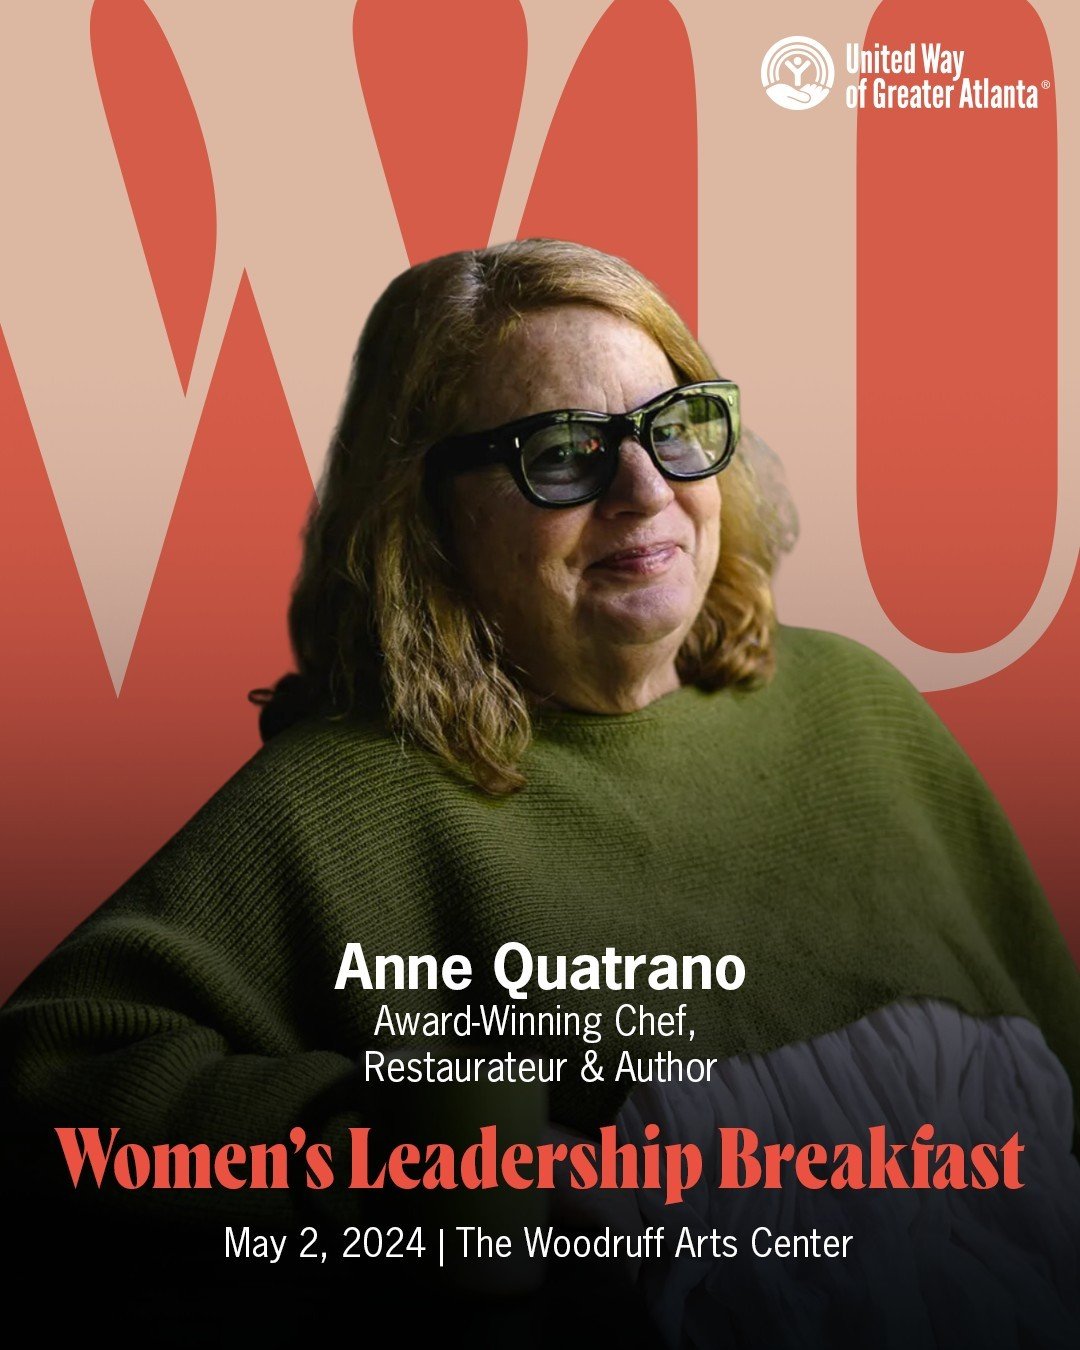 Our very own Chef Anne Quatrano is a featured speaker at Women United's 16th Annual Women&rsquo;s Leadership Breakfast! The event will take place on May 2nd from 8AM-11AM.

Tickets and more information are available at the link in our bio!